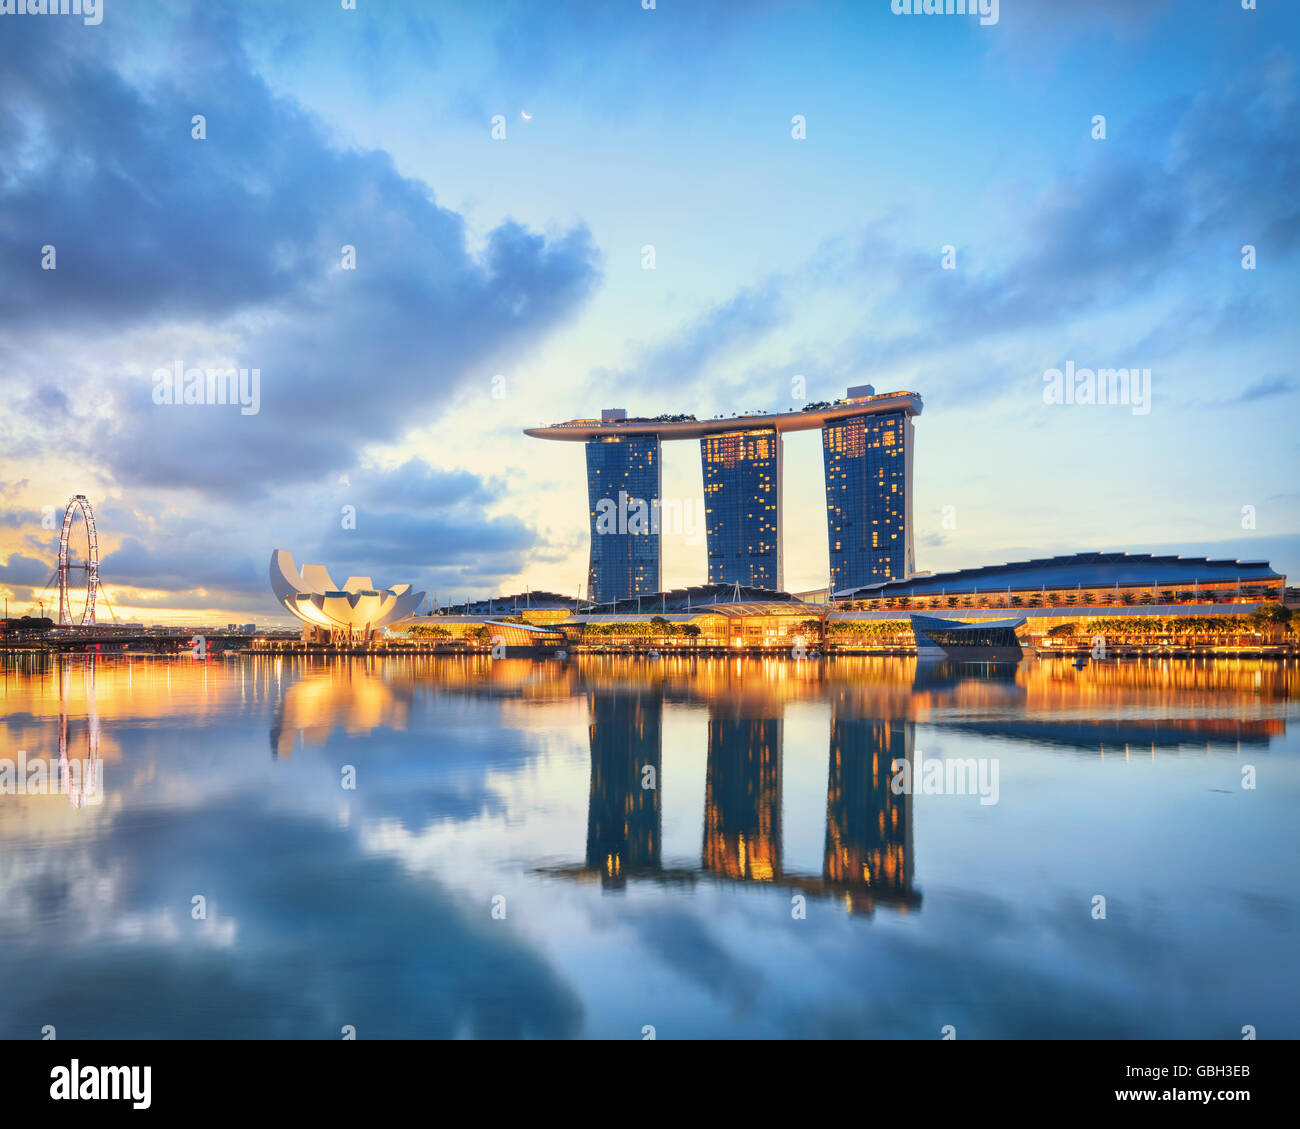 View on Marina Bay with docks on foreground. Modern city architecture at sunrise Stock Photo